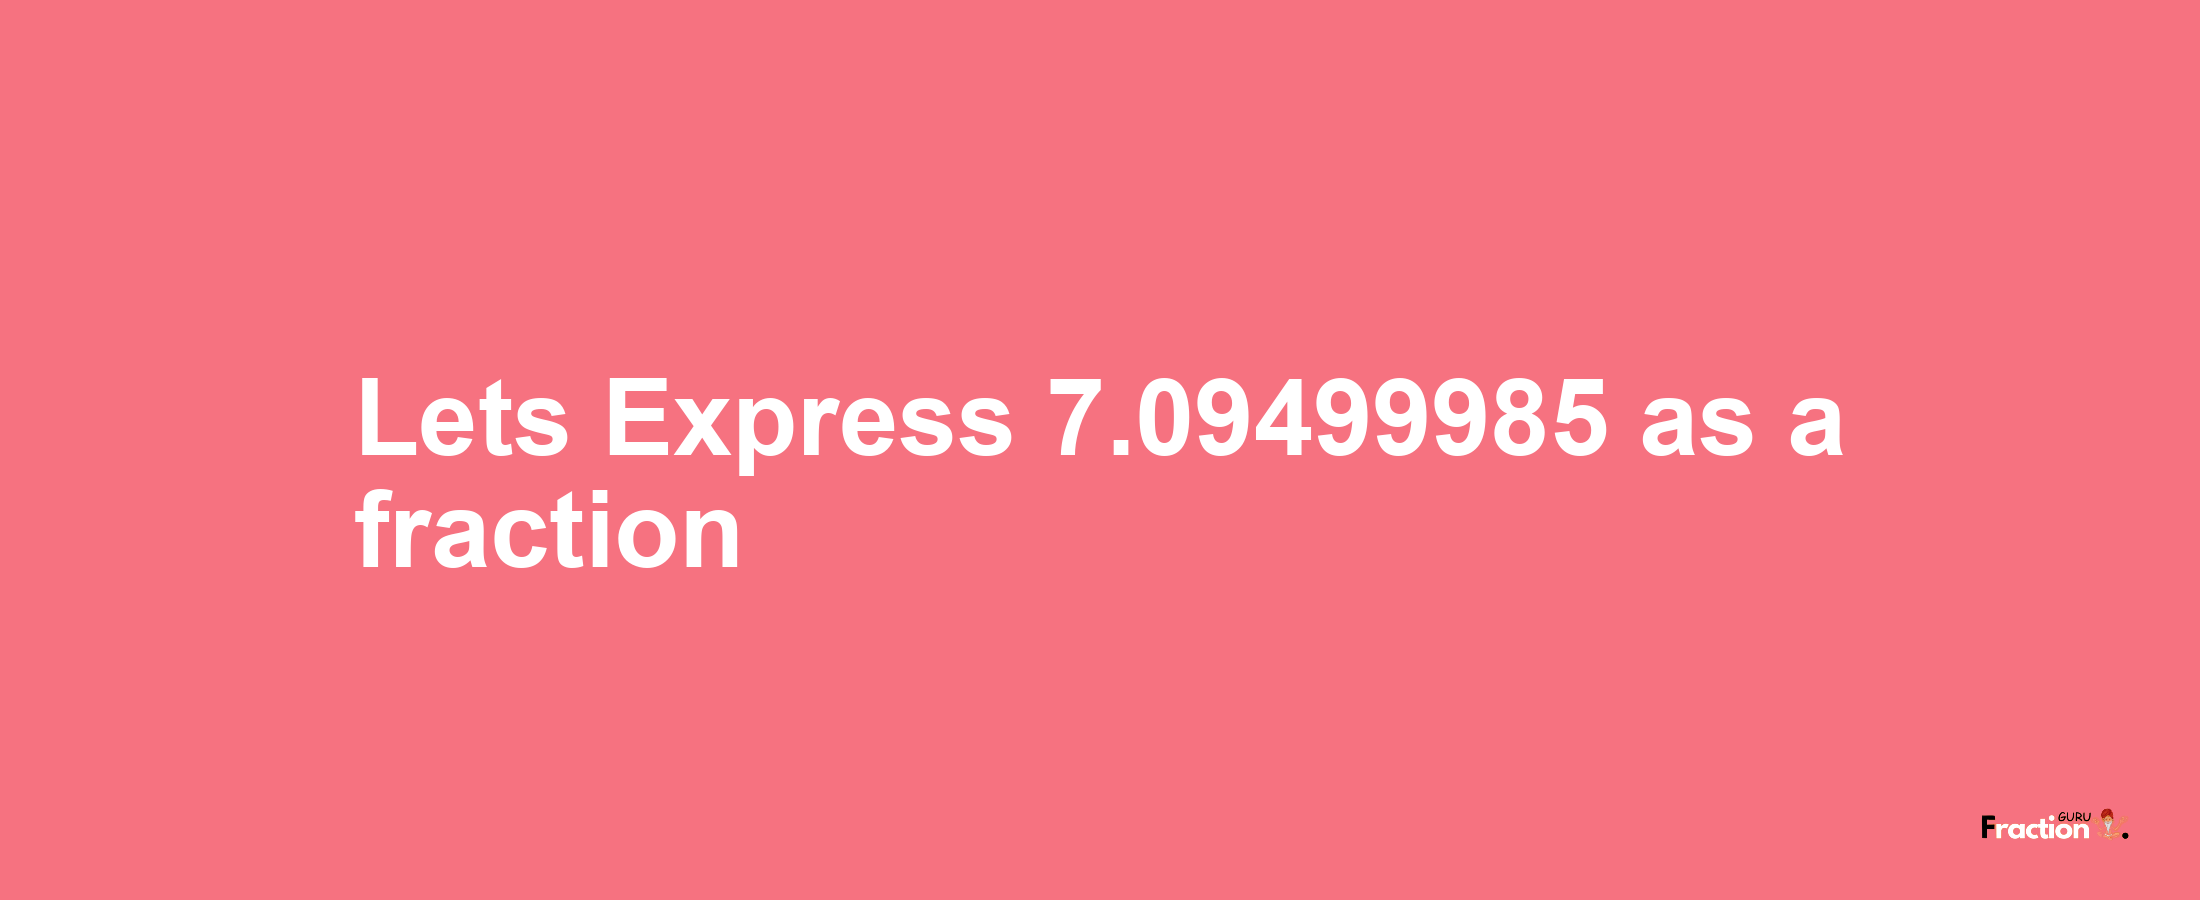 Lets Express 7.09499985 as afraction